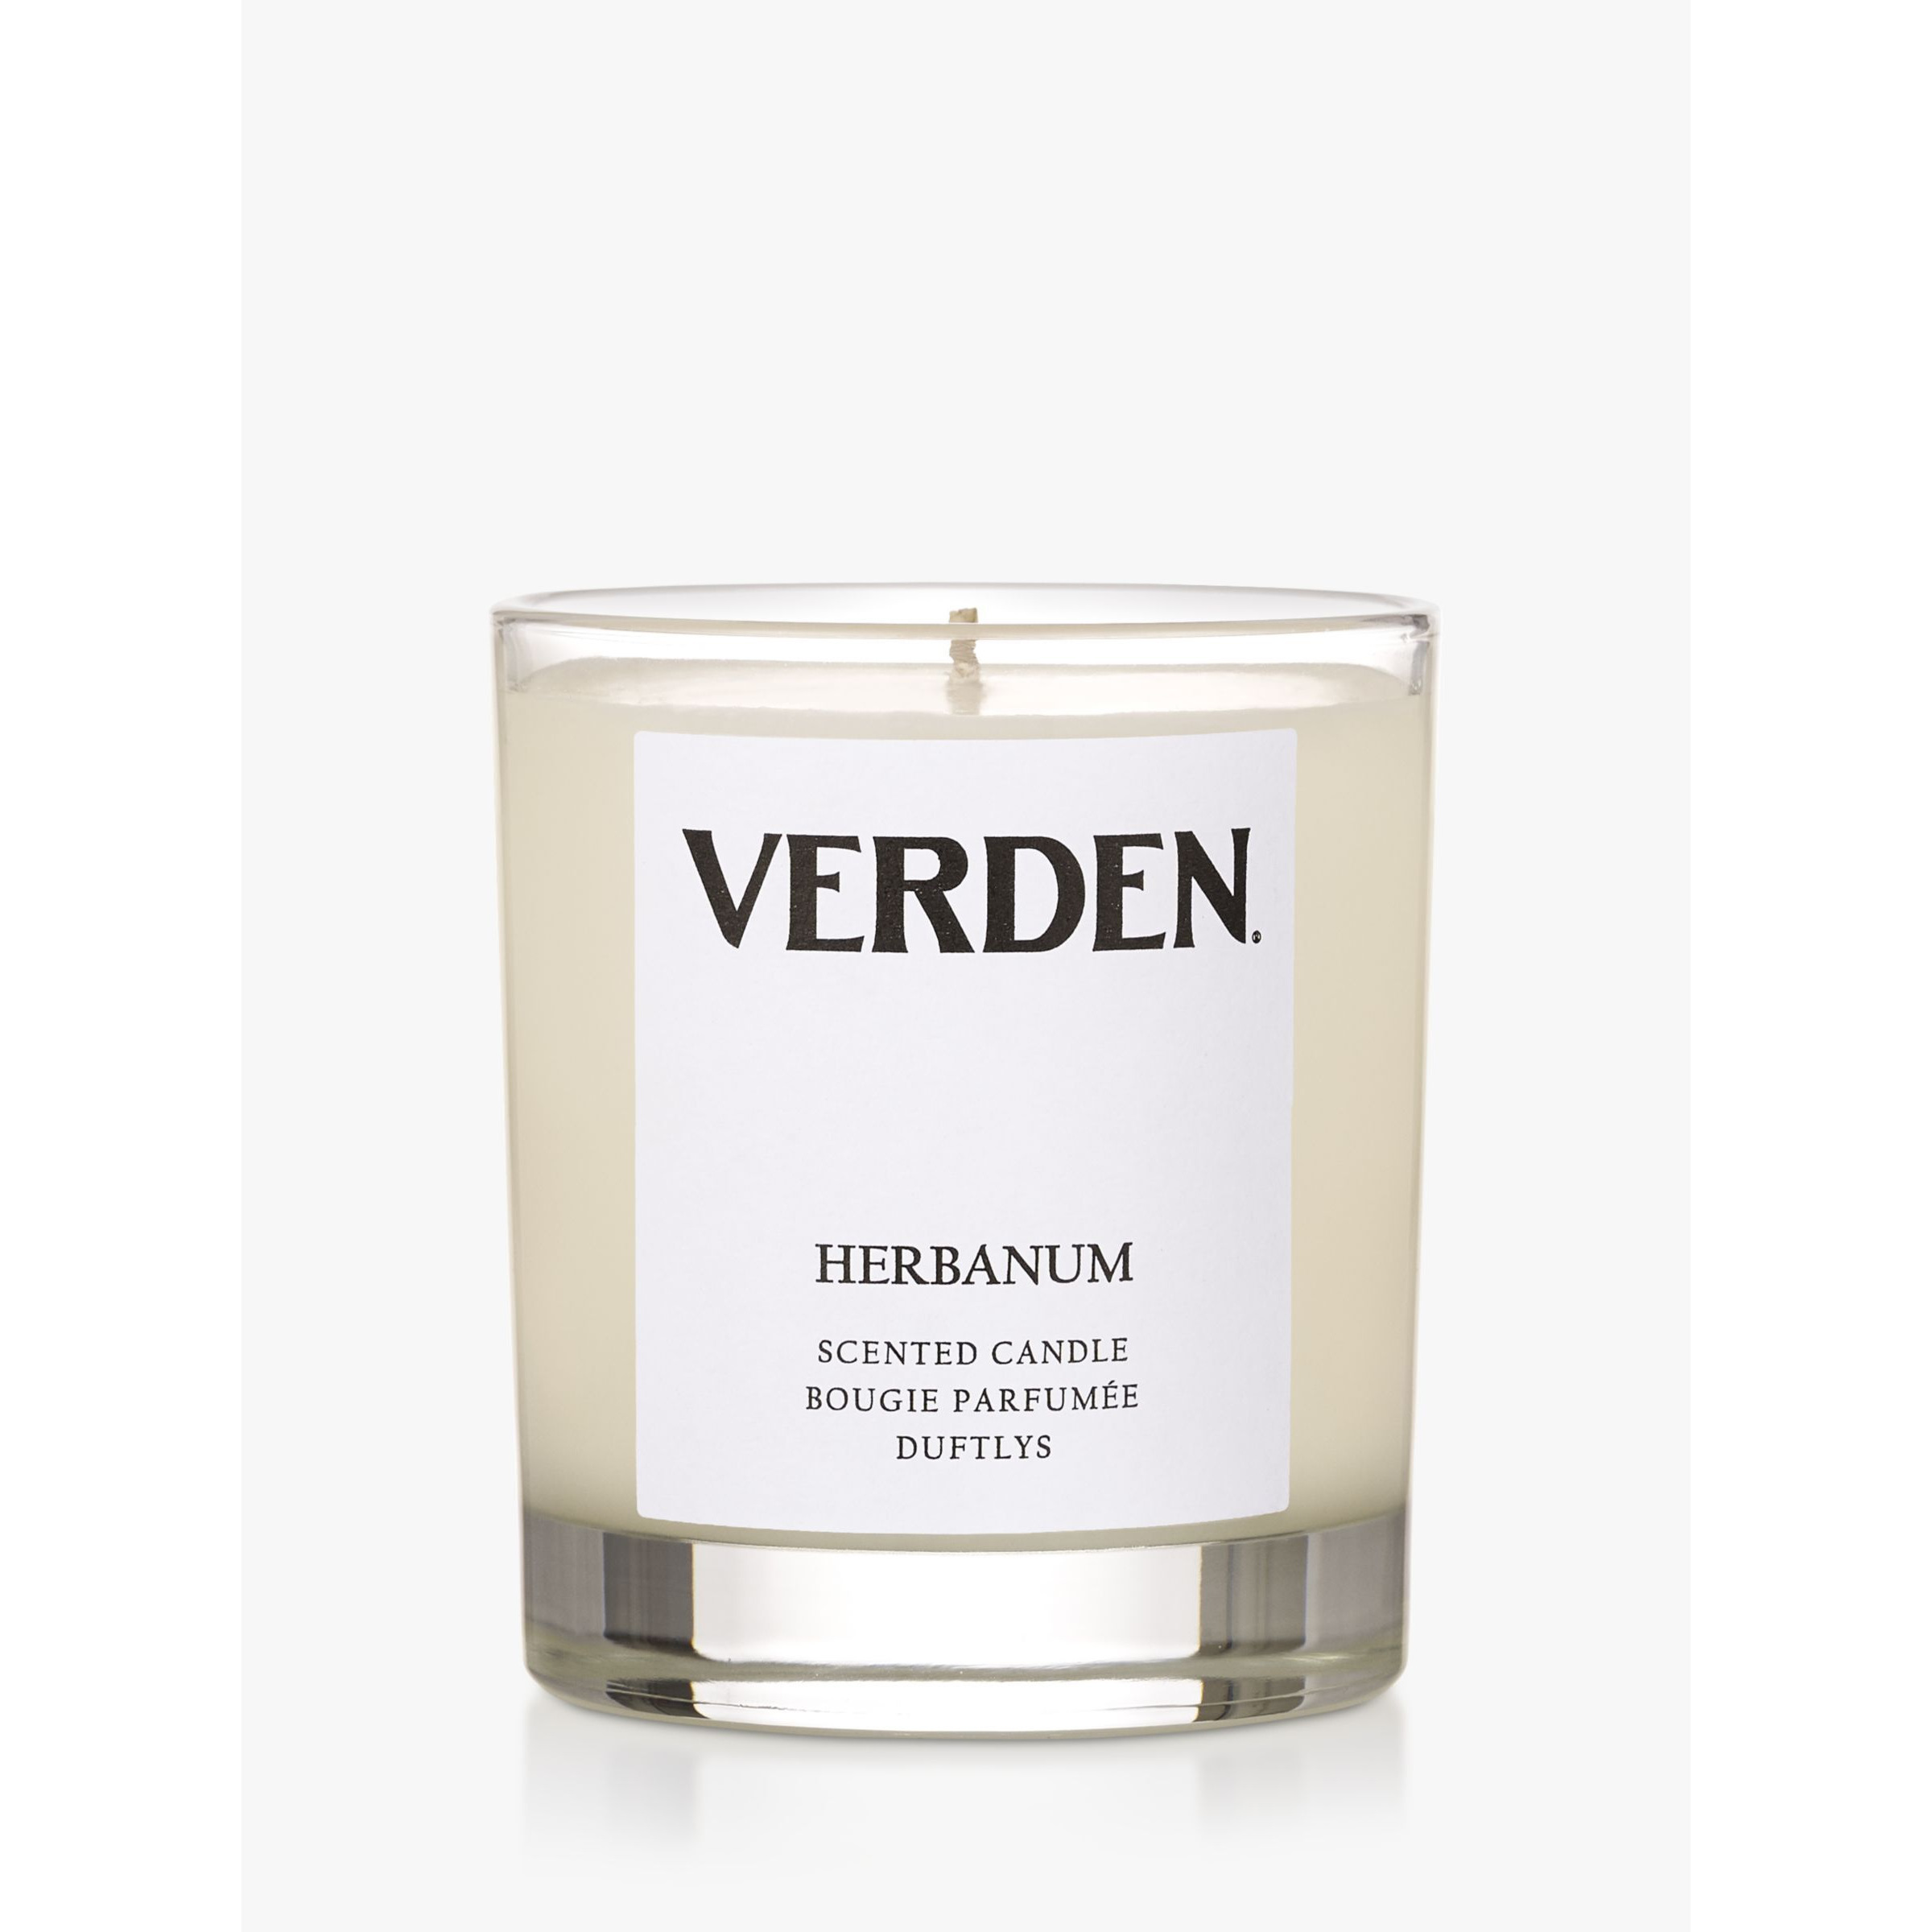 VERDEN Herbanum Scented Candle, 220g - image 1